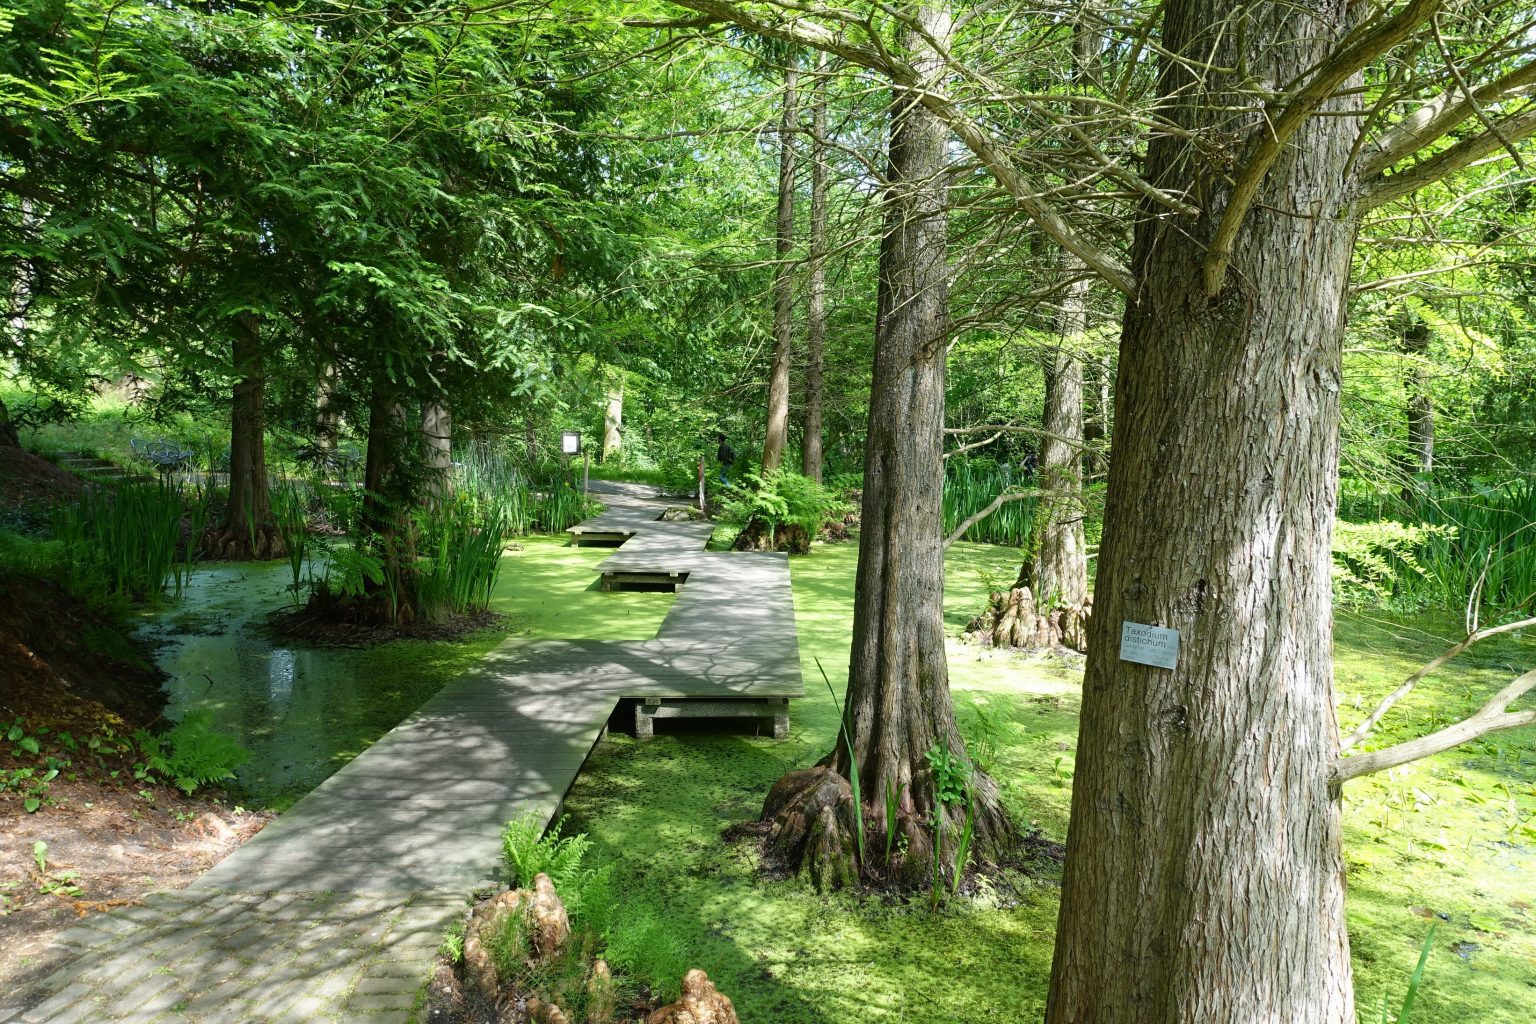 Pathway over the pond surrounded by old trees.